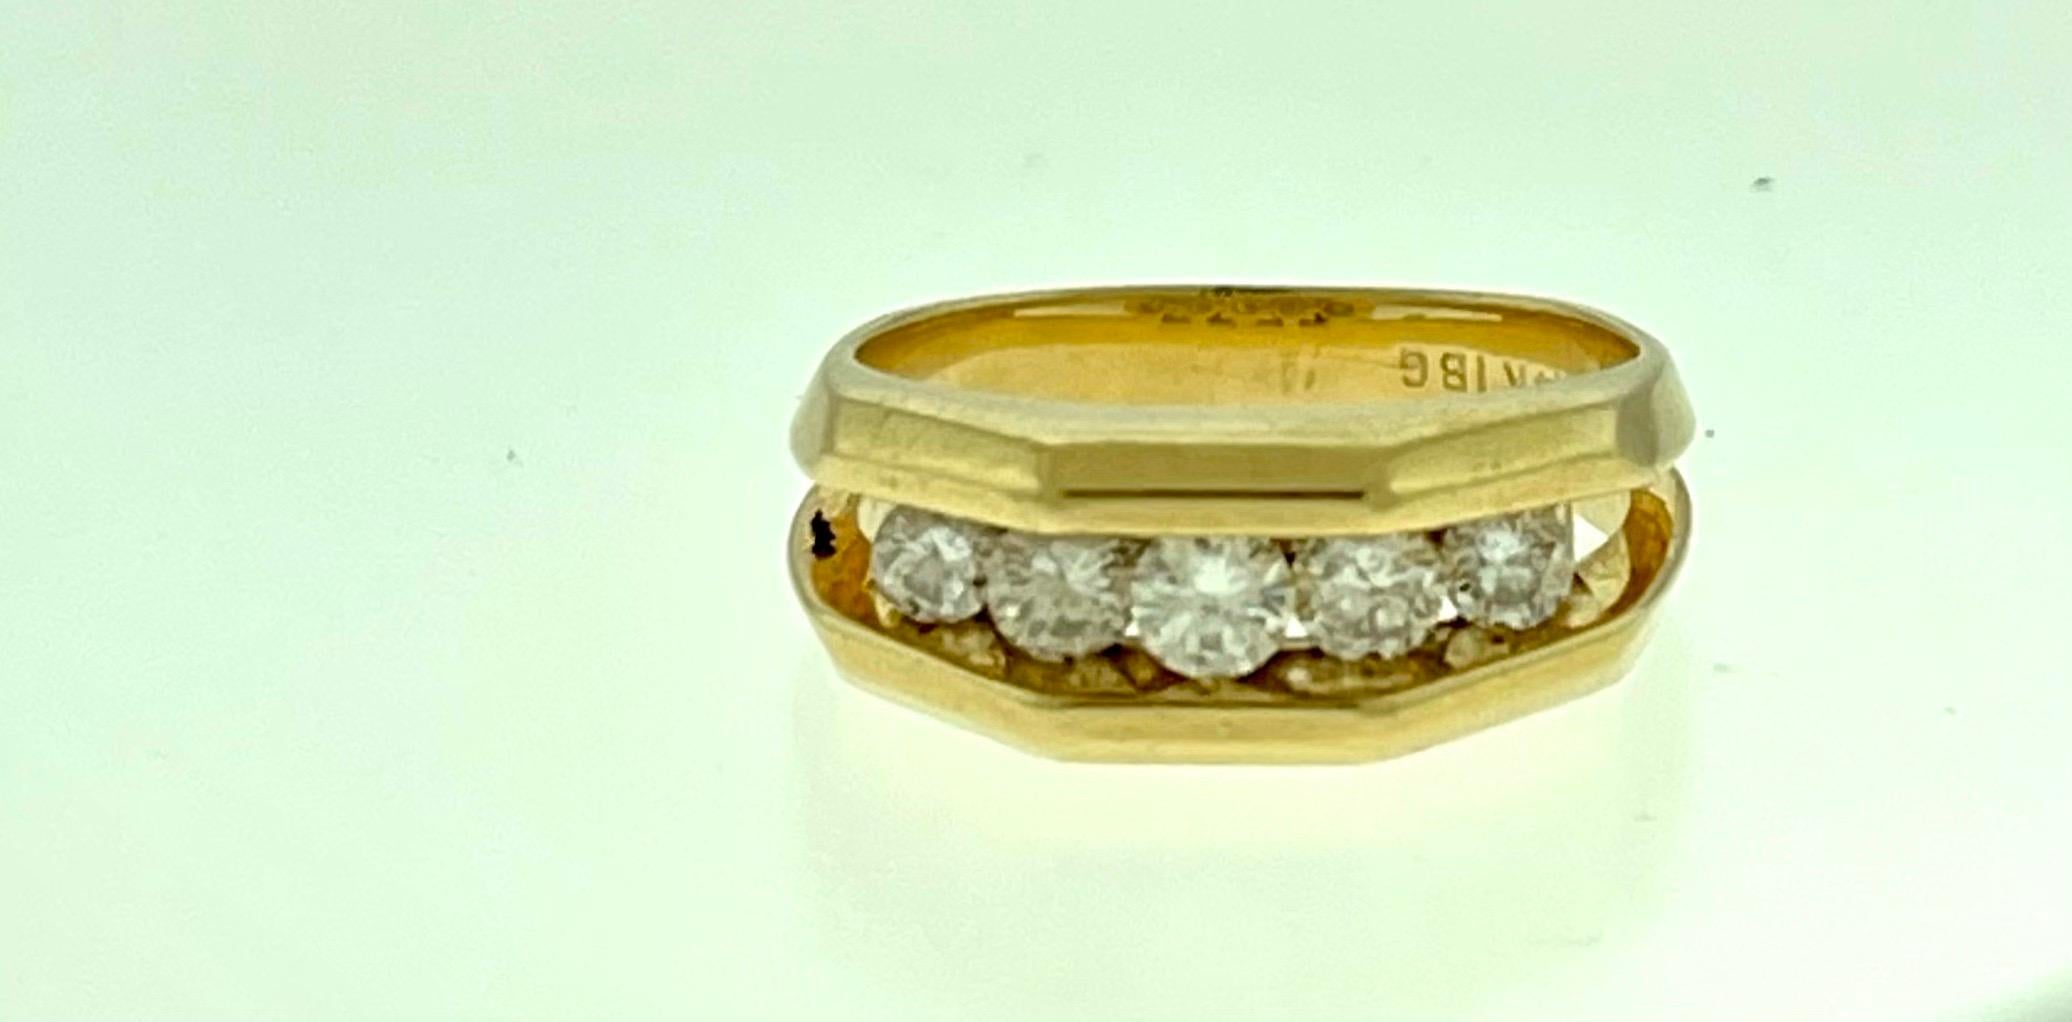 5 Diamonds, 1 Carat Unisex 1-Row Diamond Band Ring in 14 Karat Yellow Gold In Excellent Condition For Sale In New York, NY